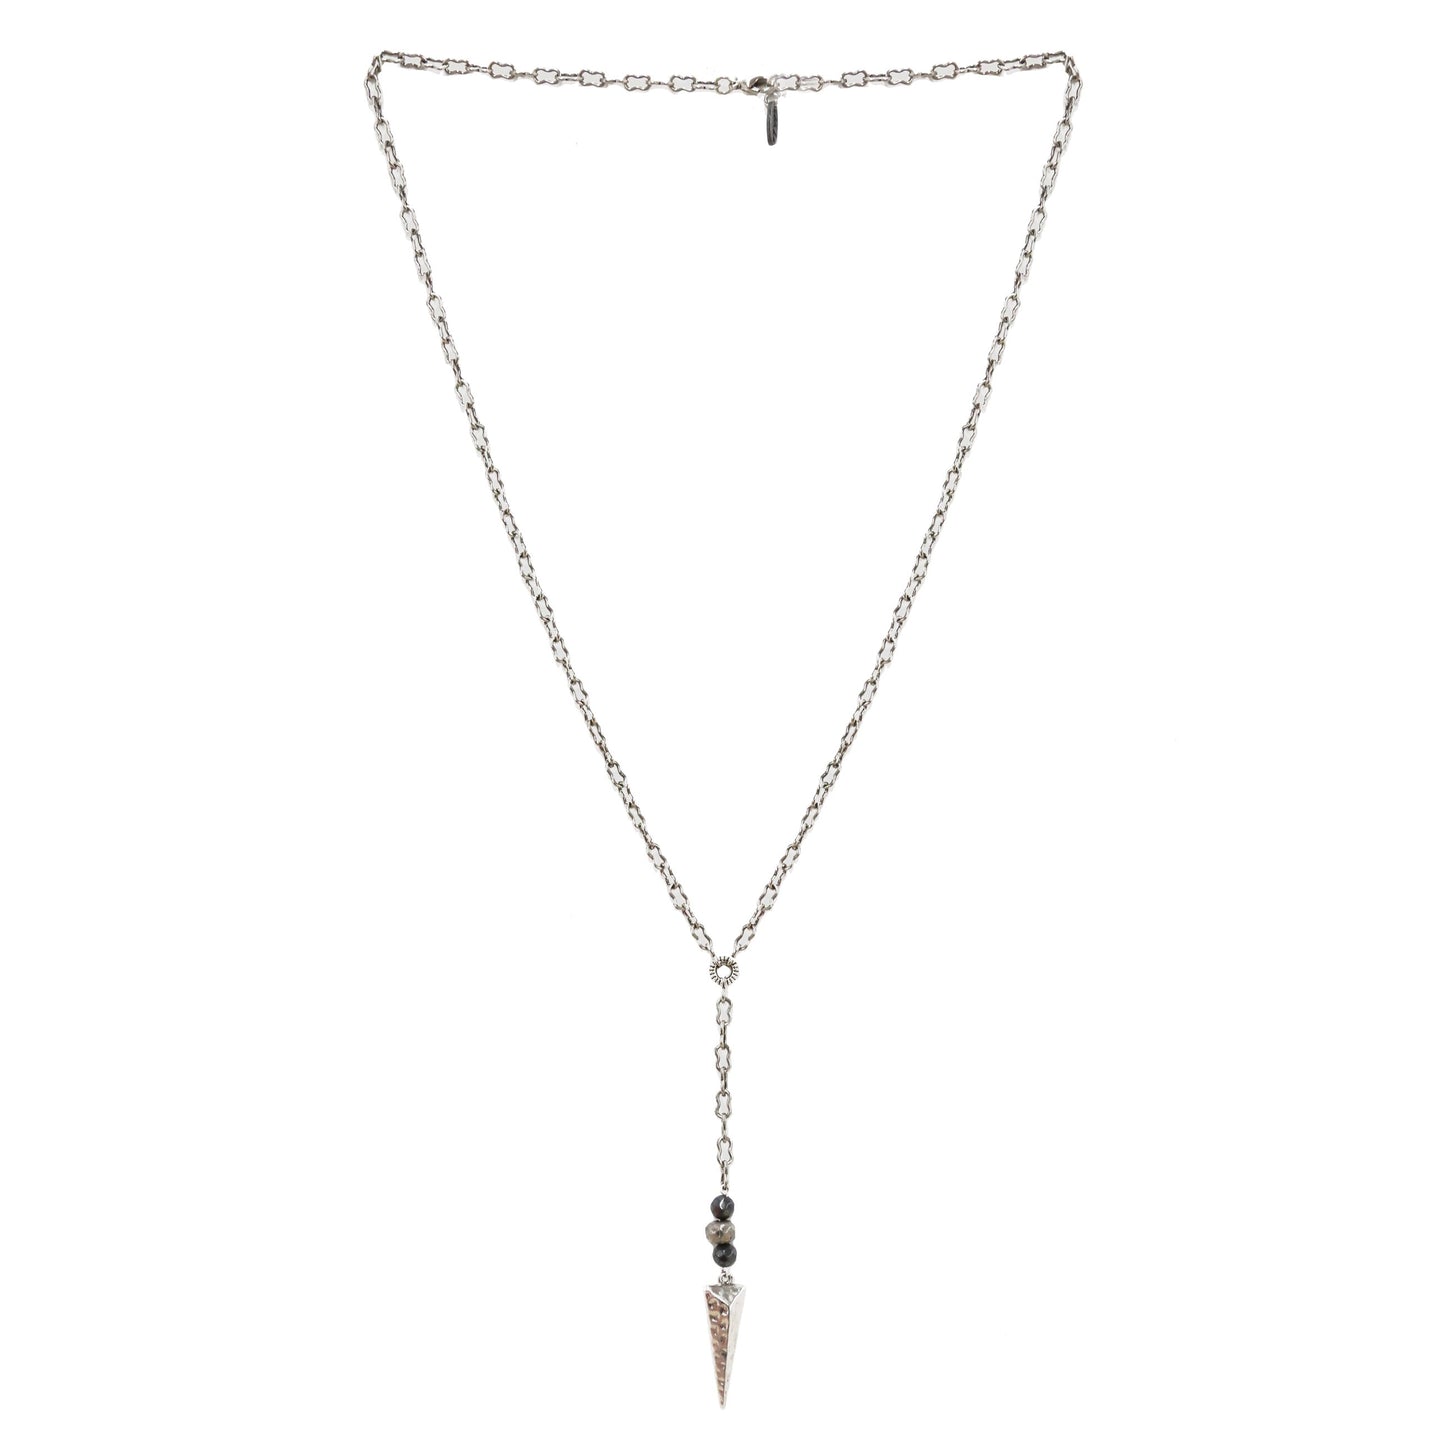 Silver Ox Chain Lariat Necklace with Hematite Beads and Silver Spike Charm